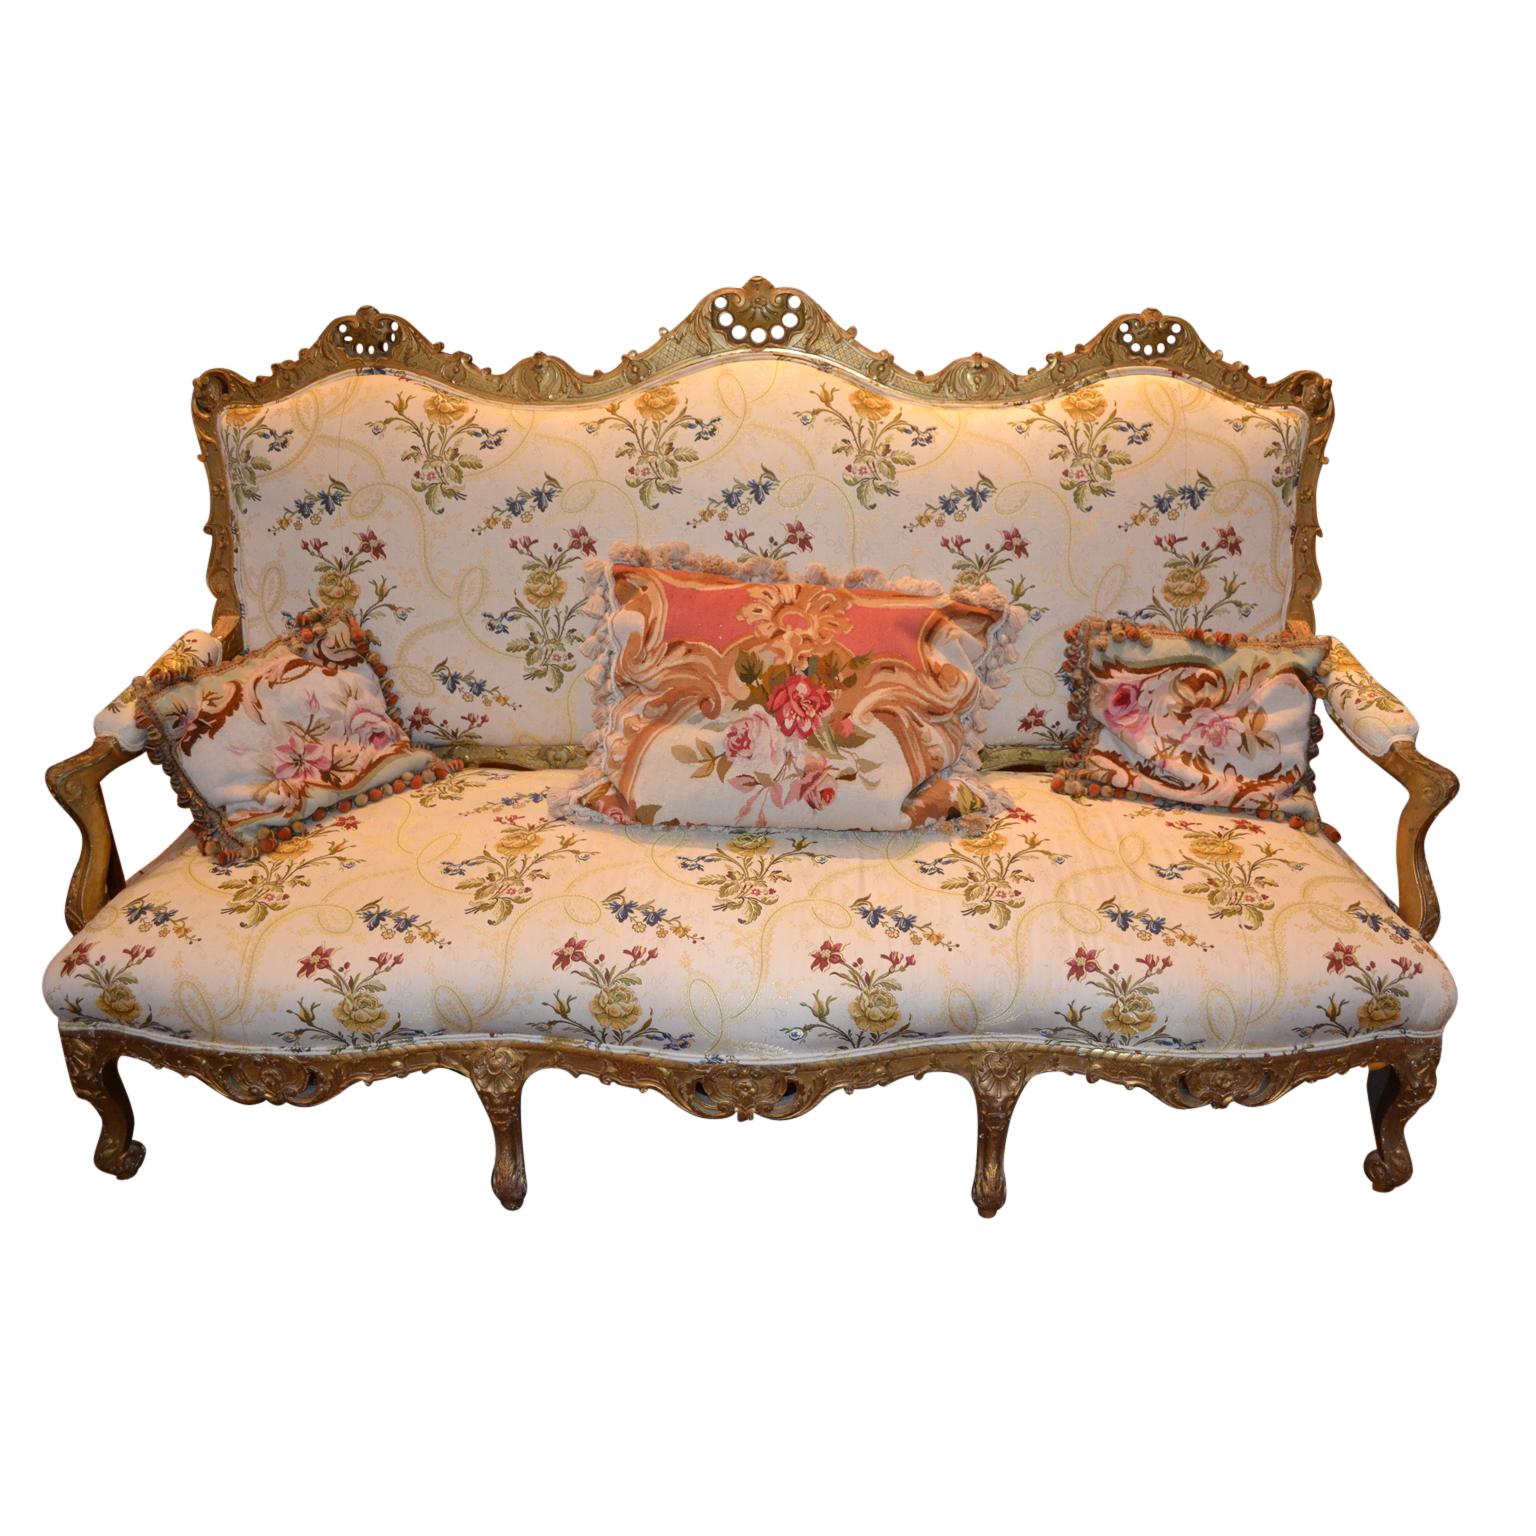 A large scale Louis XIV style open arm settee, the frame in deeply carved and gilded wood. The sculpted frame raised on eight cabriole legs; recently upholstered, (including the back in a sympathetic ivory ground floral fabric).